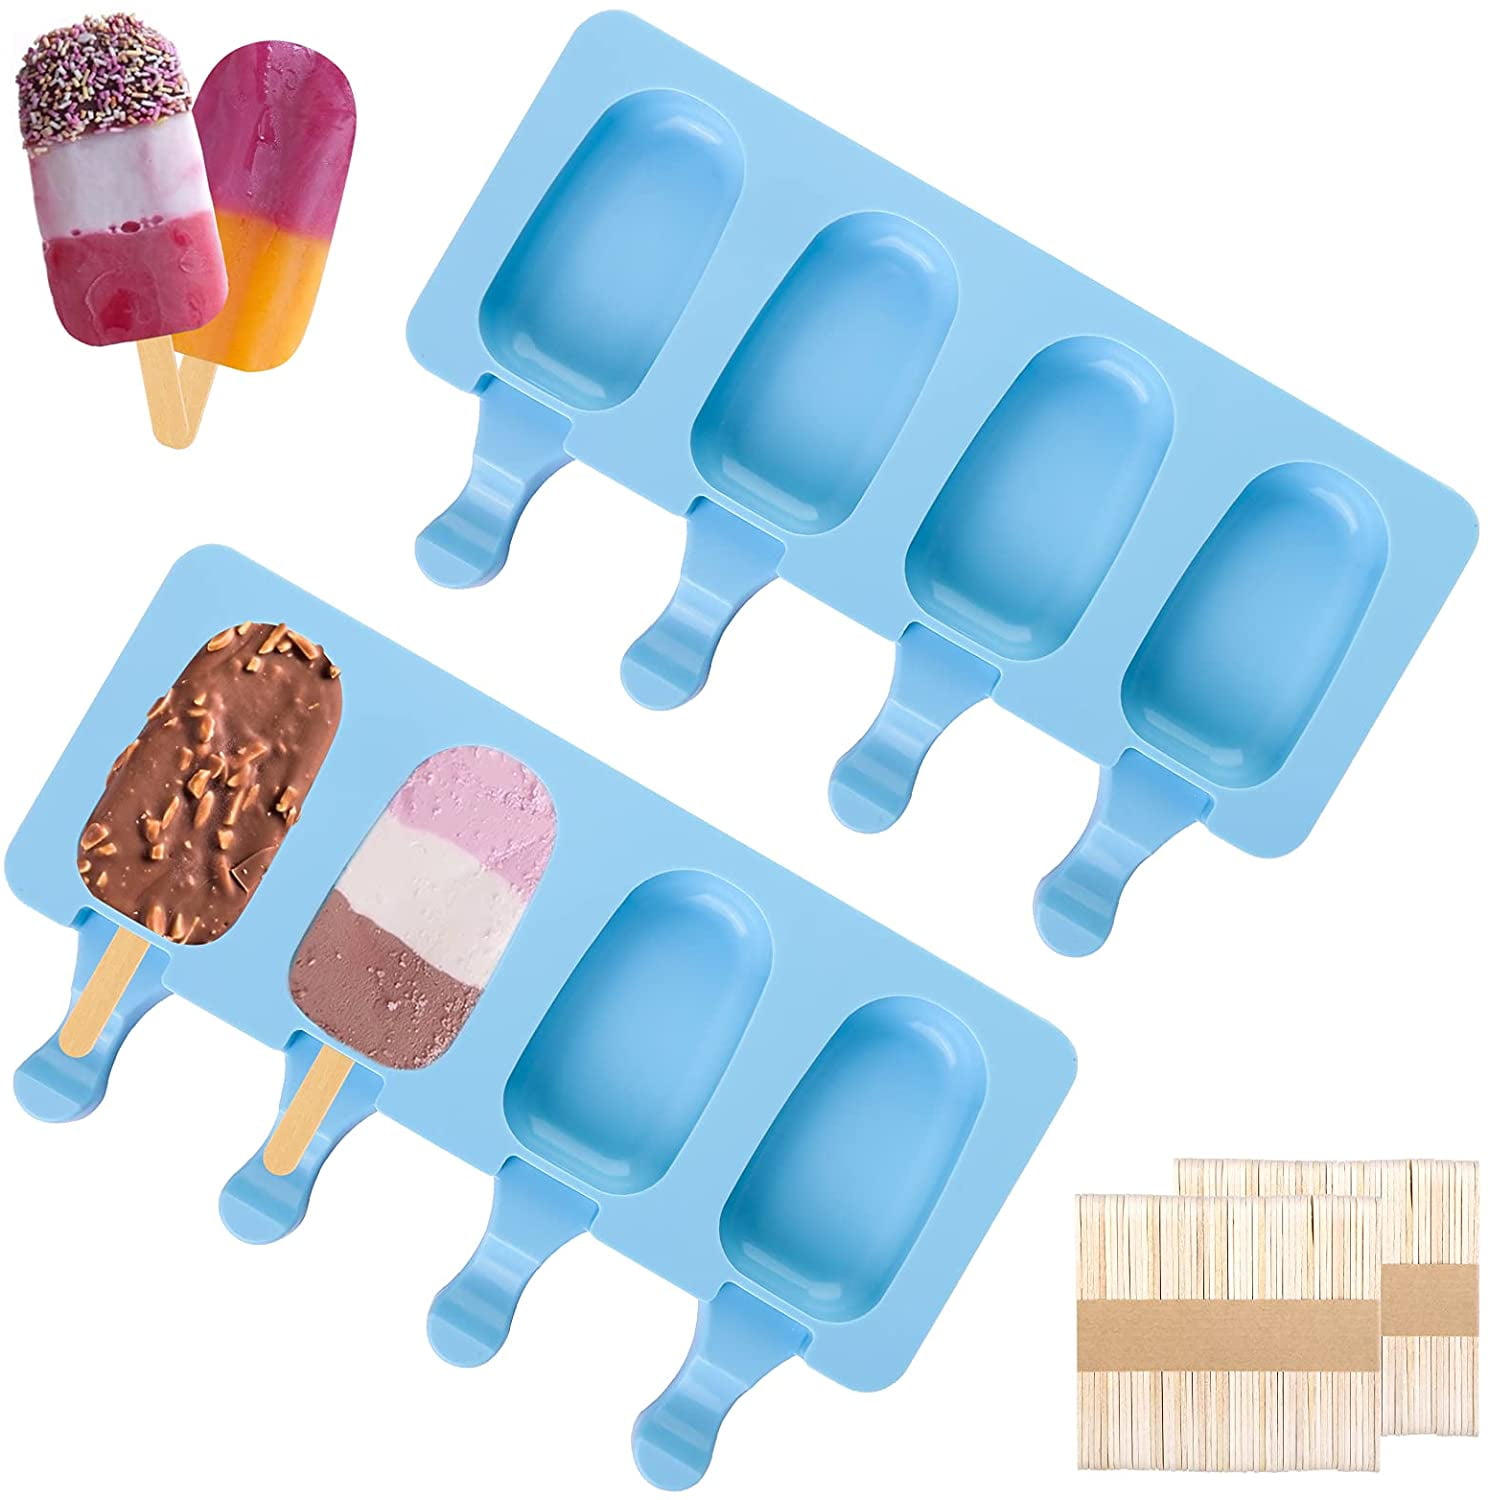 4 Cell Popsicle Mold Silicone DIY Frozen Ice Cream Mold Ice Pop Maker For DIY US